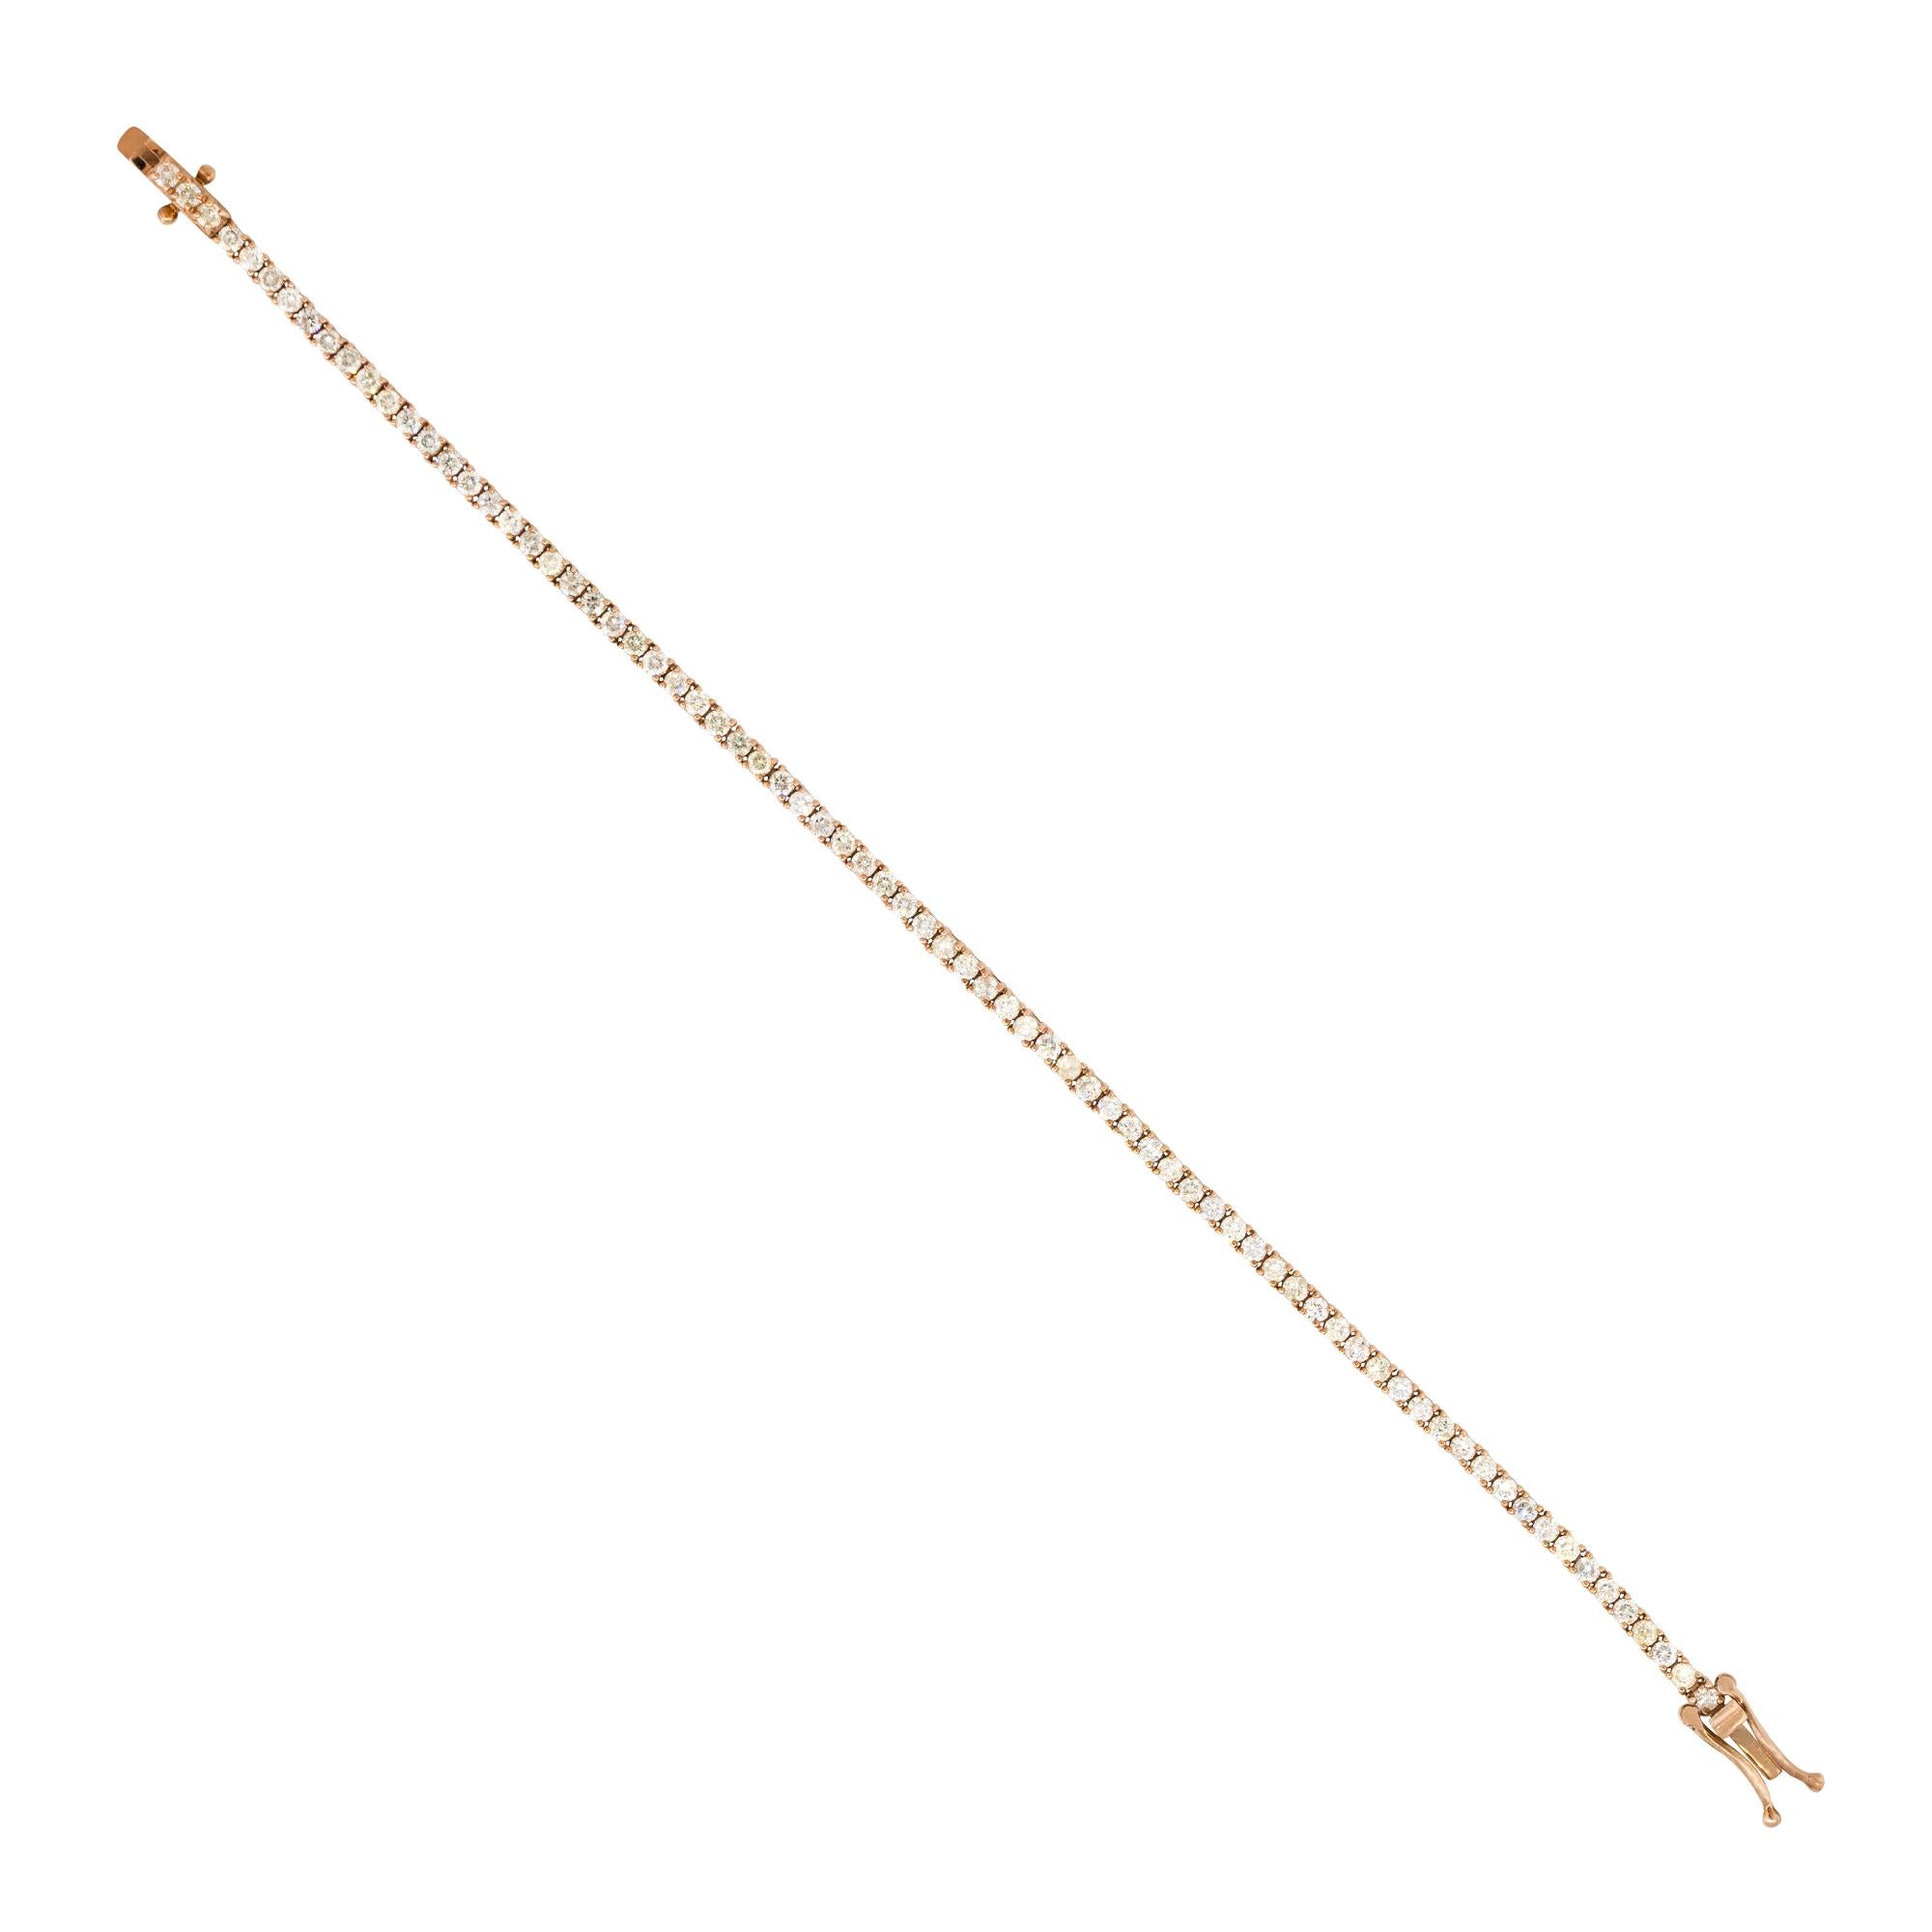 14k Rose Gold 2.66ctw Round Brilliant Diamond Tennis Bracelet
Material: 14k Rose Gold
Diamond Details: Approximately 2.66ctw of Round Brilliant Diamonds. Diamonds are G/H in color and VS in clarity
Clasps: Tongue in box clasp
Total Weight: 7.3g